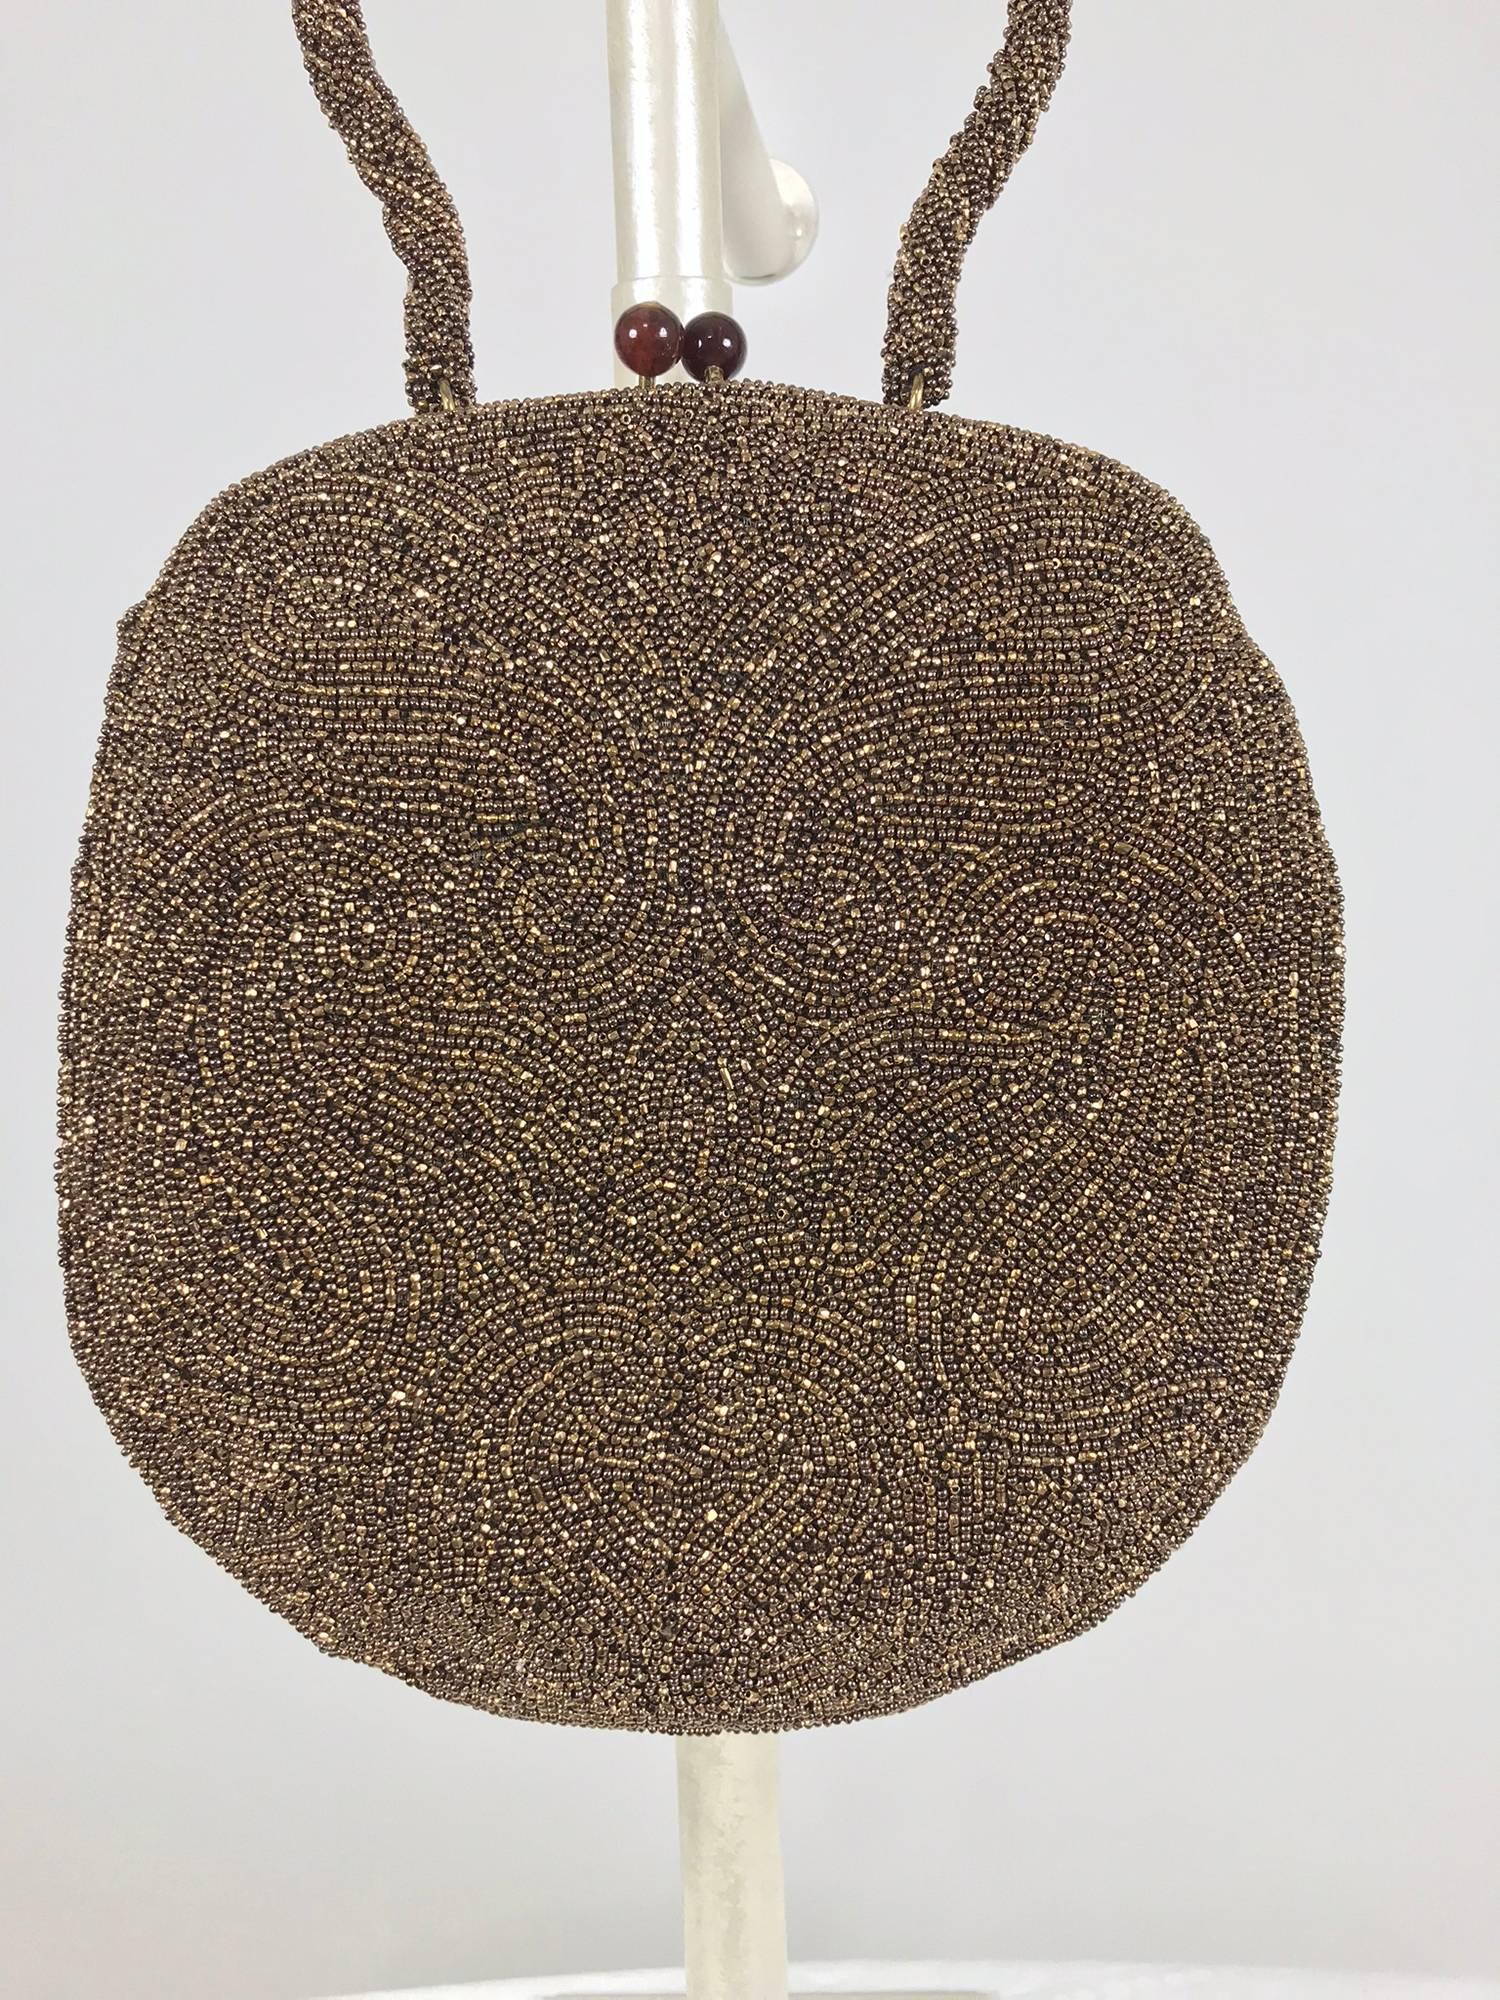 Walborg unique copper beaded frame evening bag from the 1940s, new with the original tag. This beautiful bag has a oval-ish shape which is unique. The handle is bead covered and shaped. The bag closes with tortoise shell coloured Lucite ball kiss